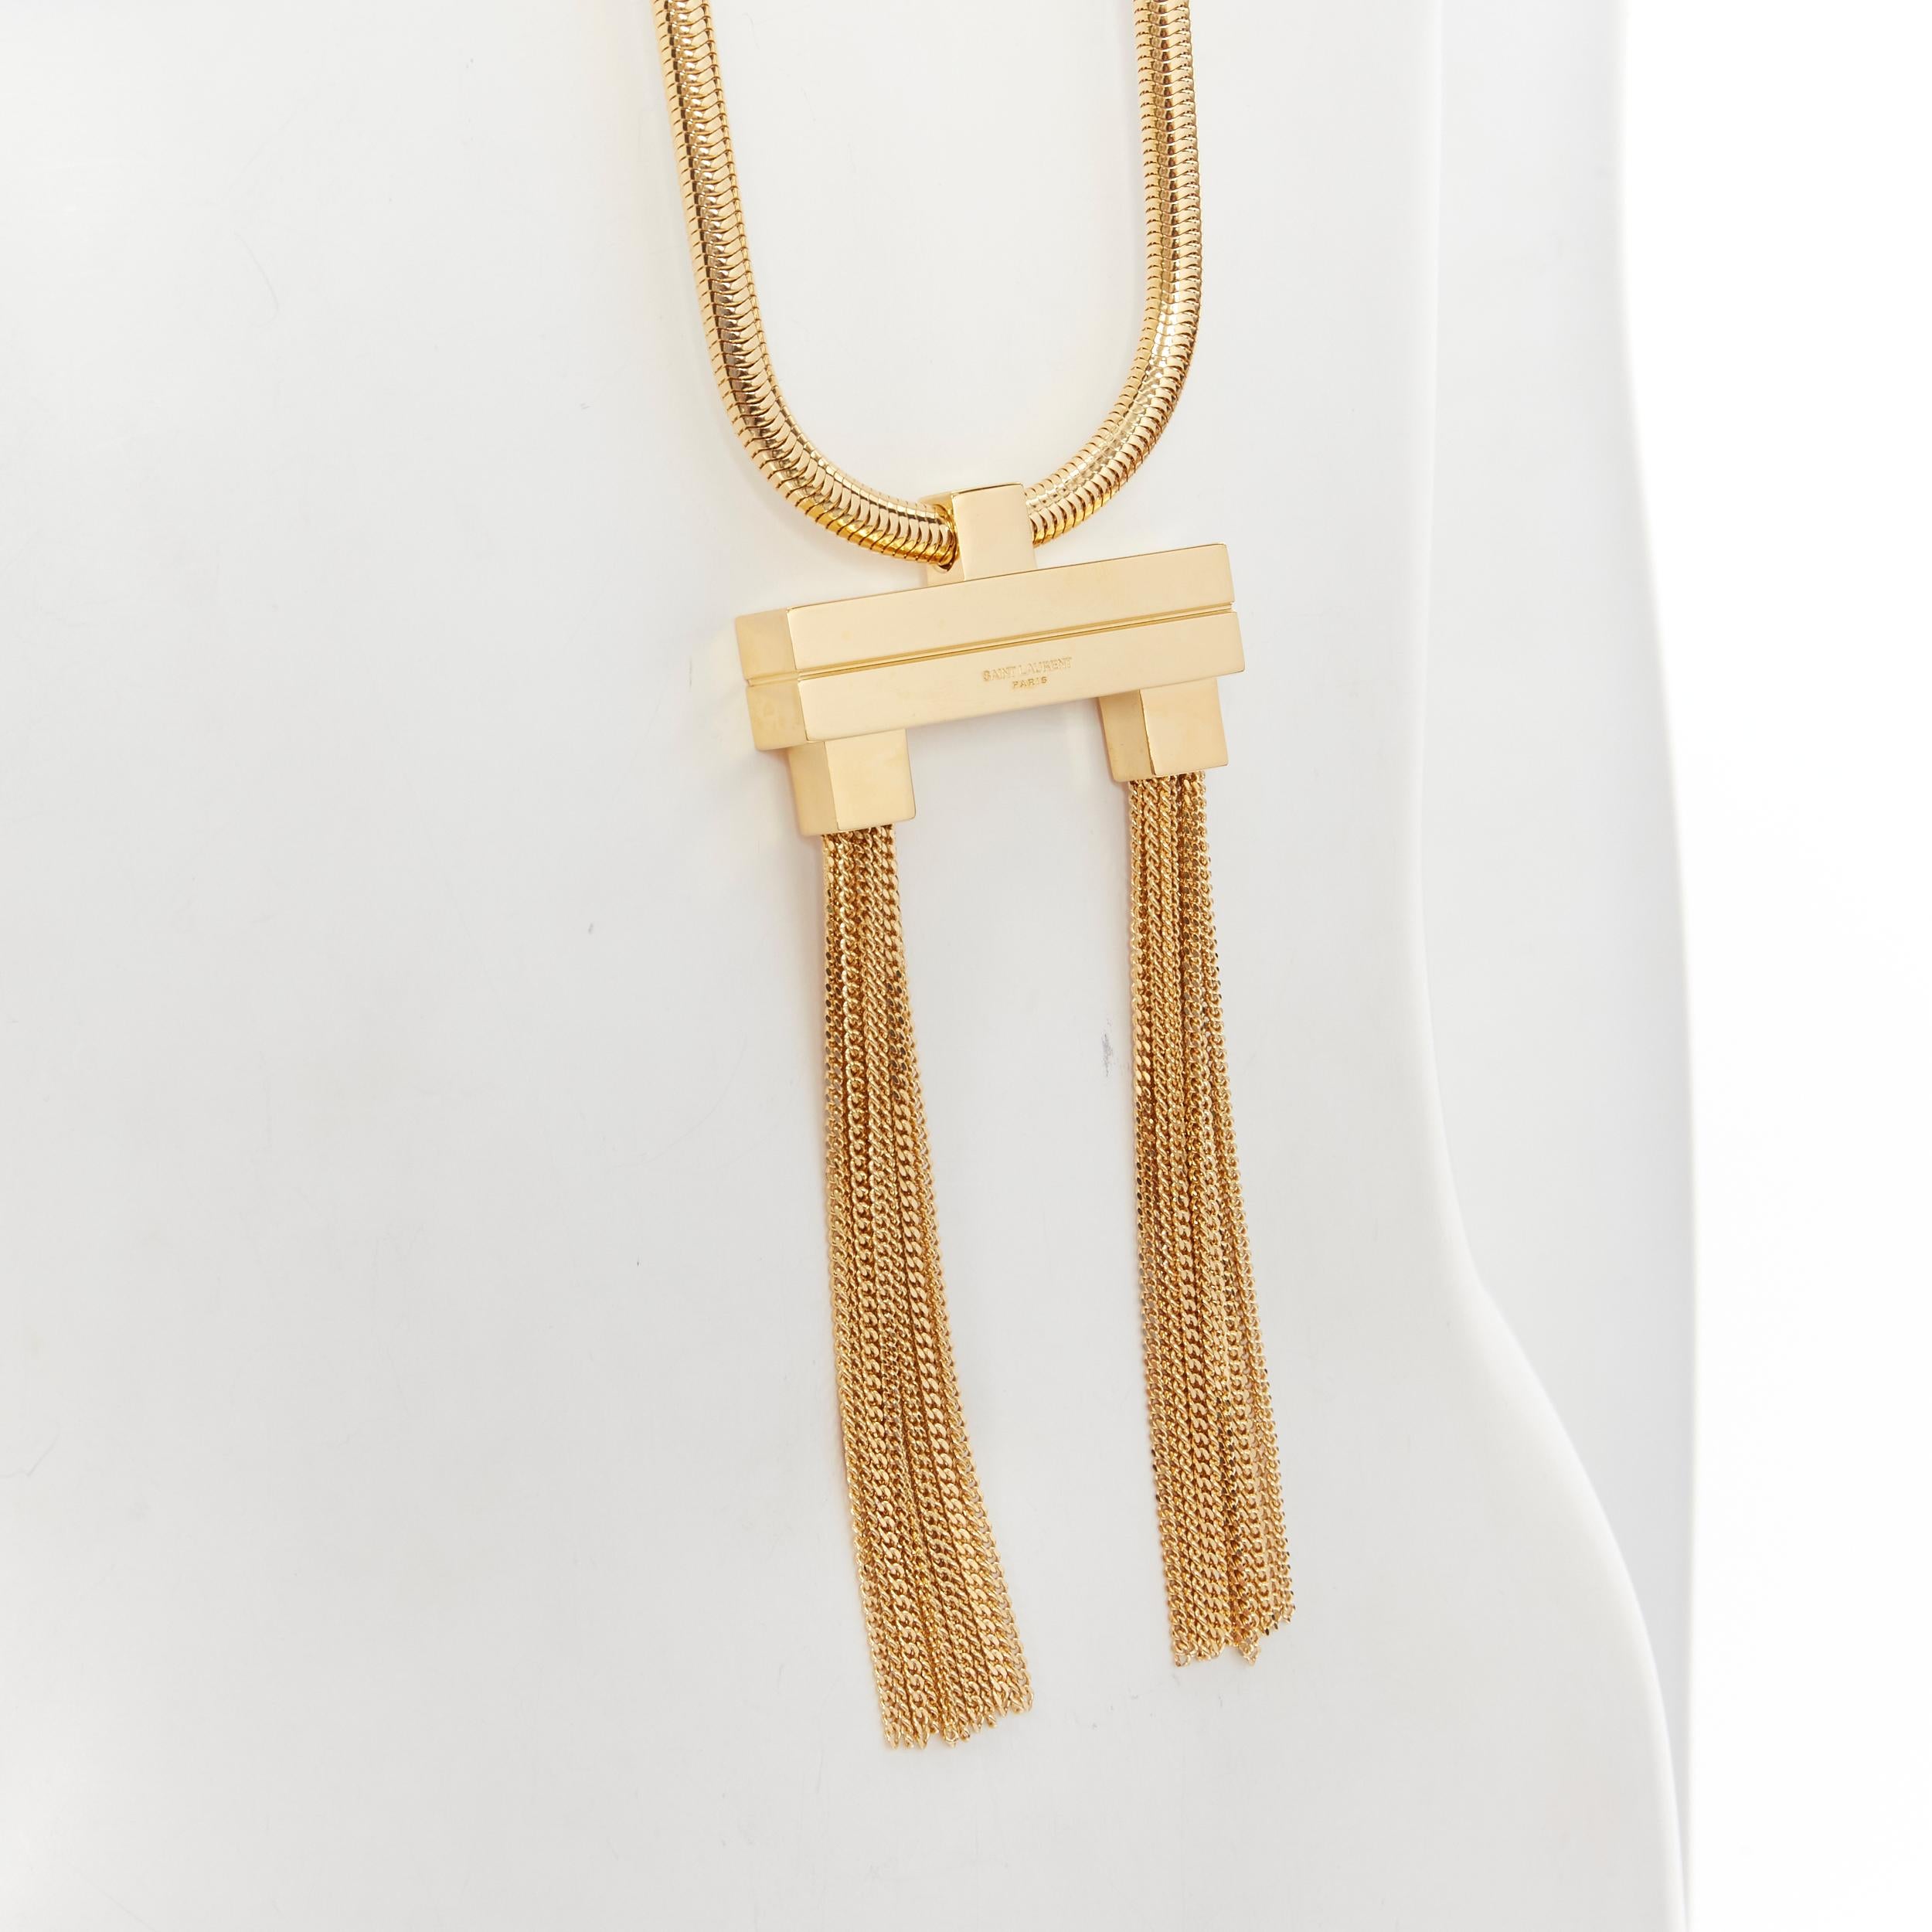 new SAINT LAURENT Hedi Slimane 2013 Runway Opium gold double tassel necklace 
Reference: TGAS/B01765 
Brand: Saint Laurent 
Designer: Hedi Slimane 
Collection: 2013 Runway 
Material: Metal 
Color: Gold 
Pattern: Solid 
Closure: Clasp
Extra Detail: